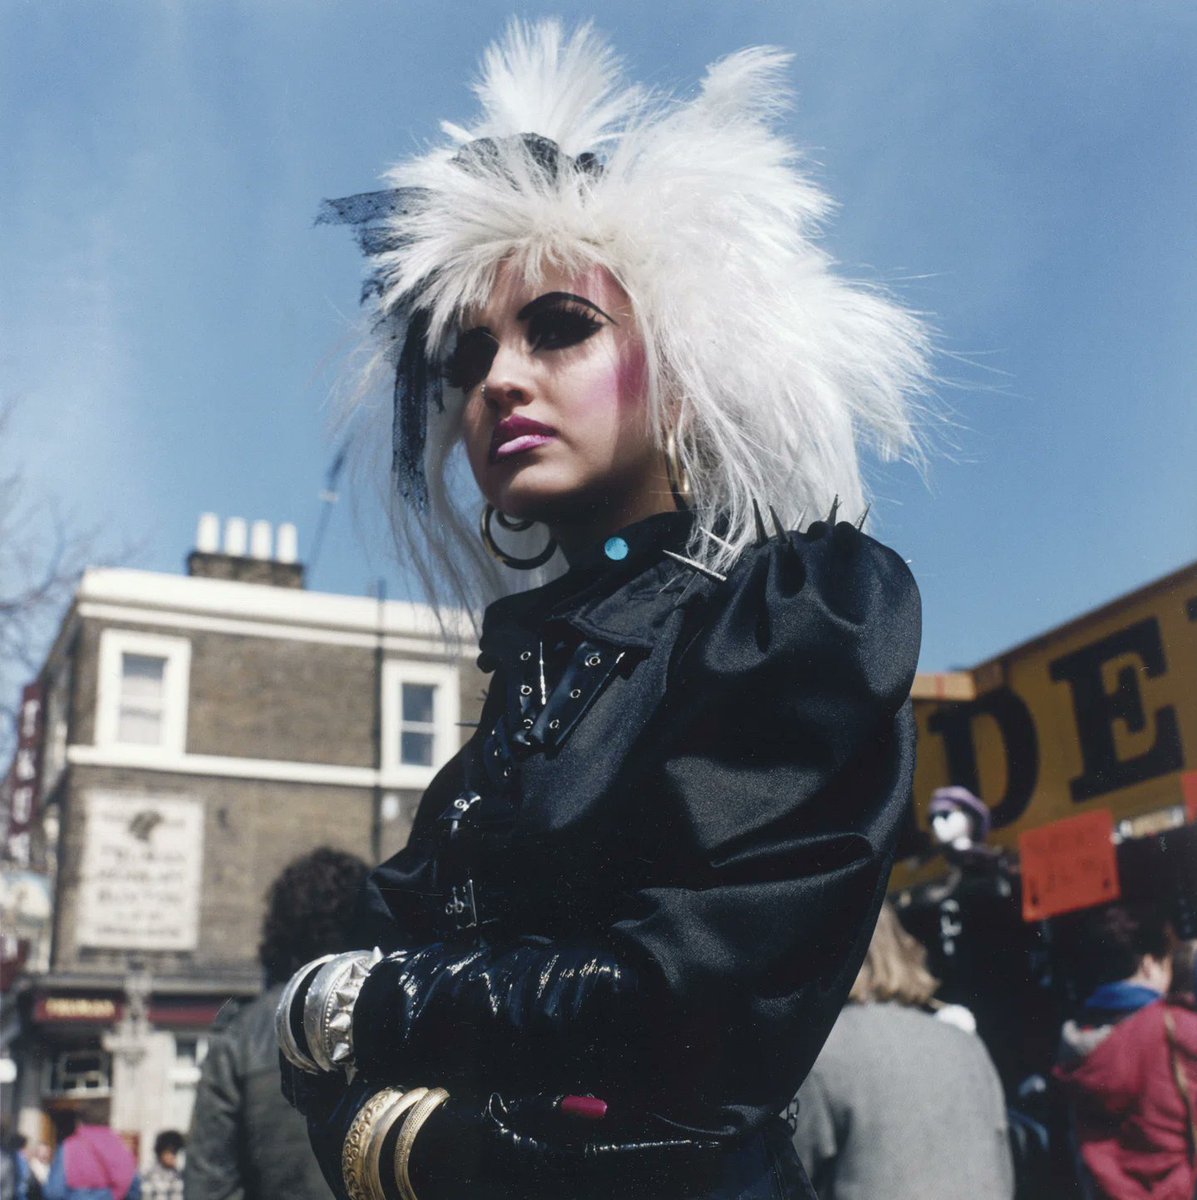 from 'Punks 1980s' by Shirley Baker #photography #photography #britishculture